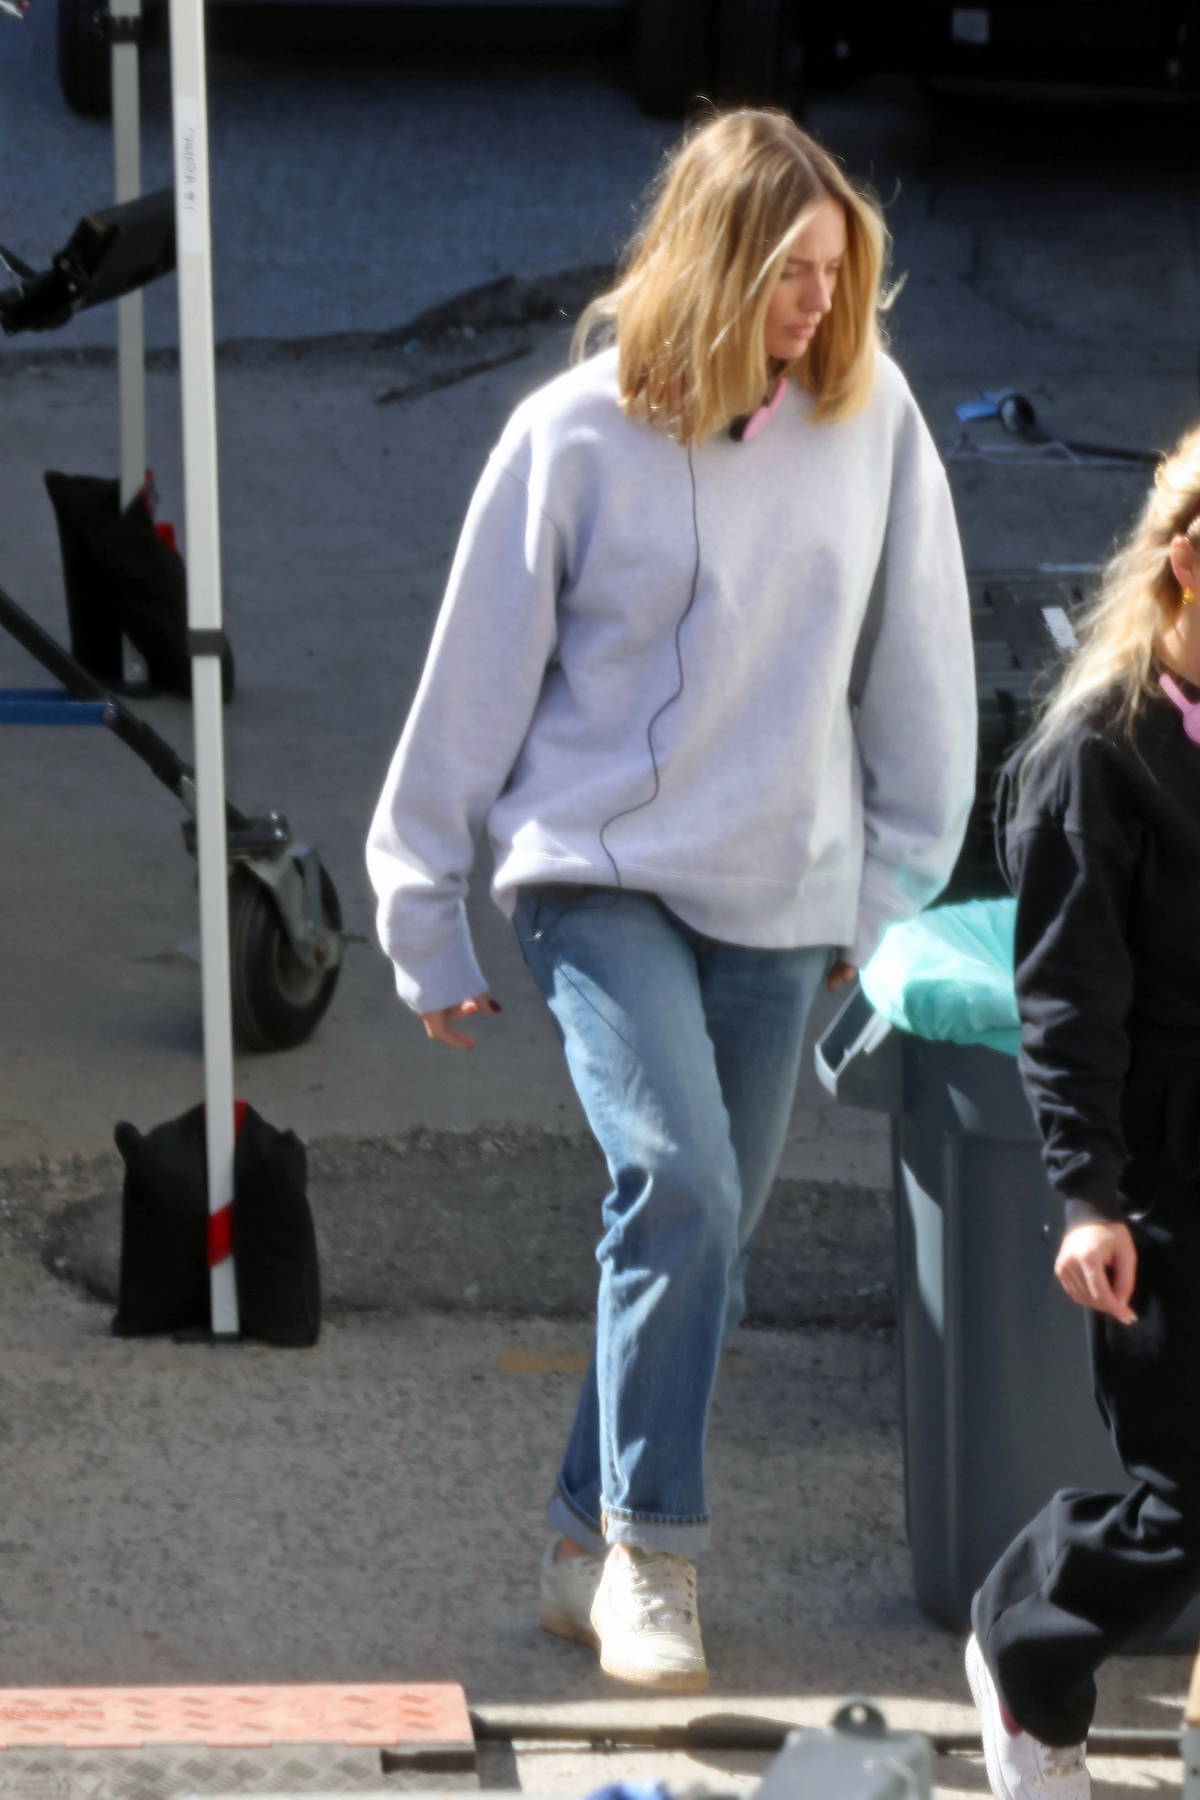 Margot-Robbie-spotted-while-filming-scenes-for-A-Big-Bold-Beautiful-Journey-in-Los-Angeles-180424_6.jpg